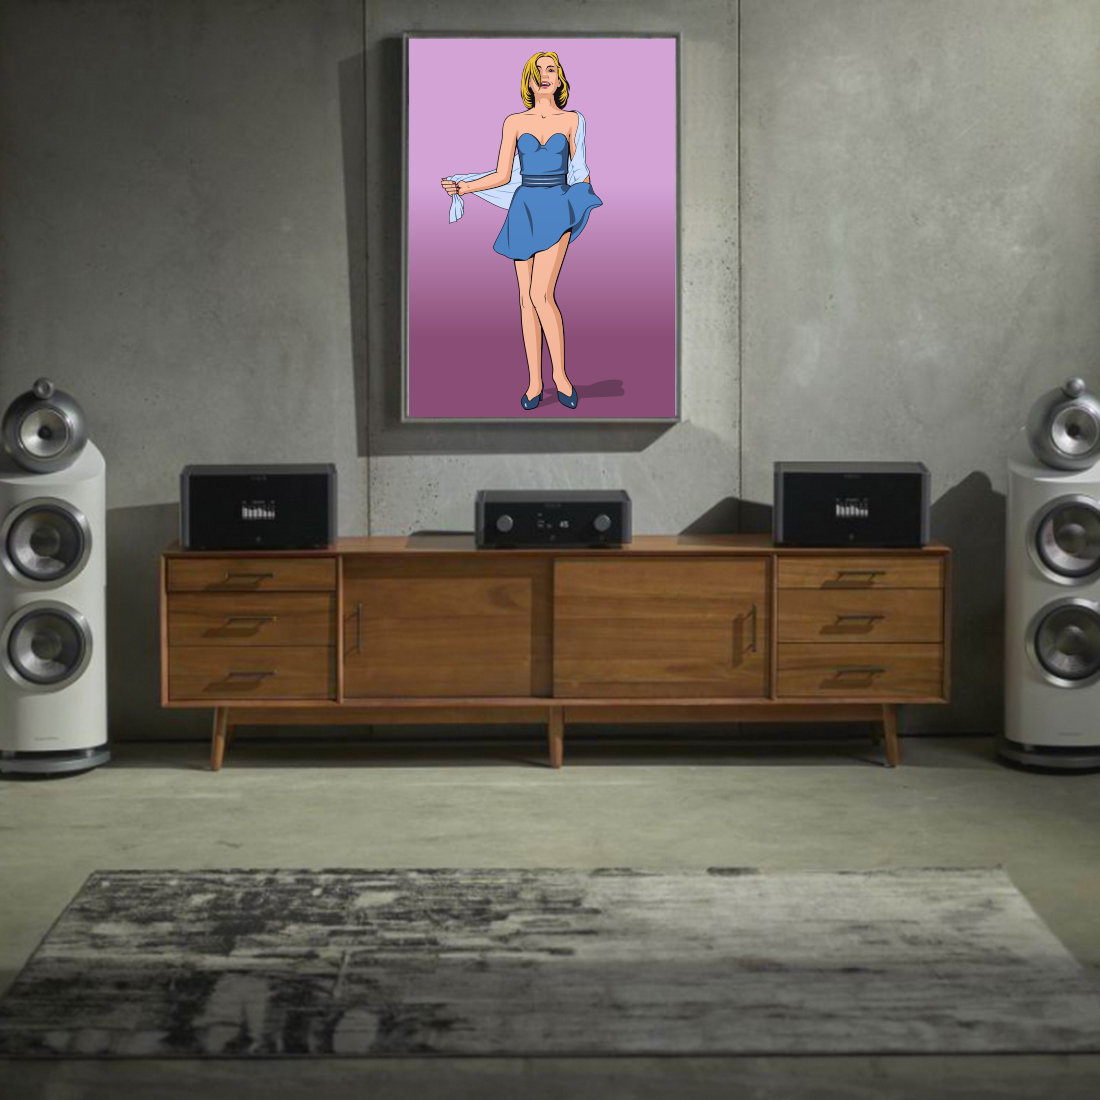 Picture of a woman in a blue dress in a living room.